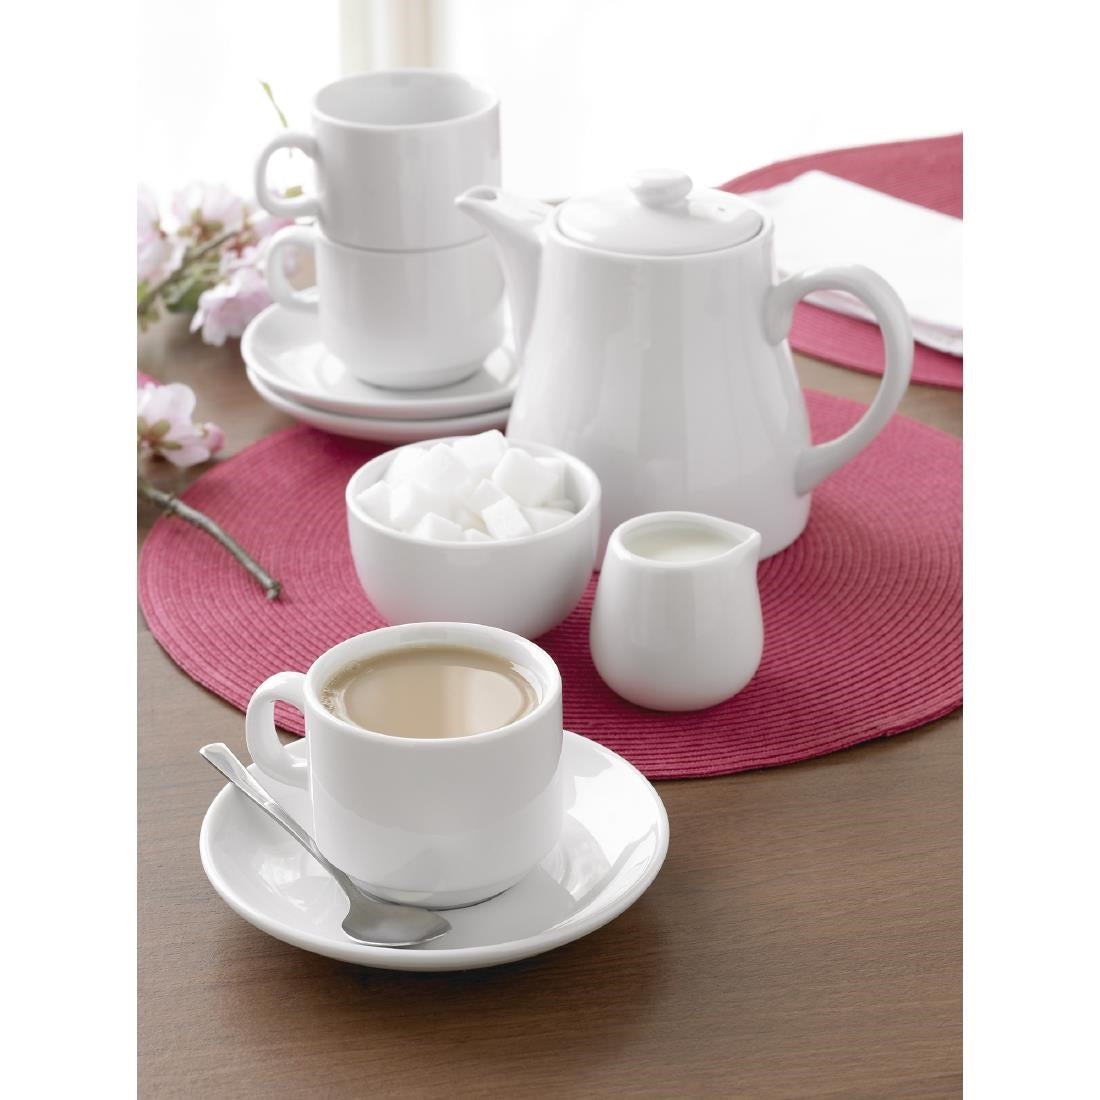 CB465 Olympia Whiteware Espresso Saucers (Pack of 12)